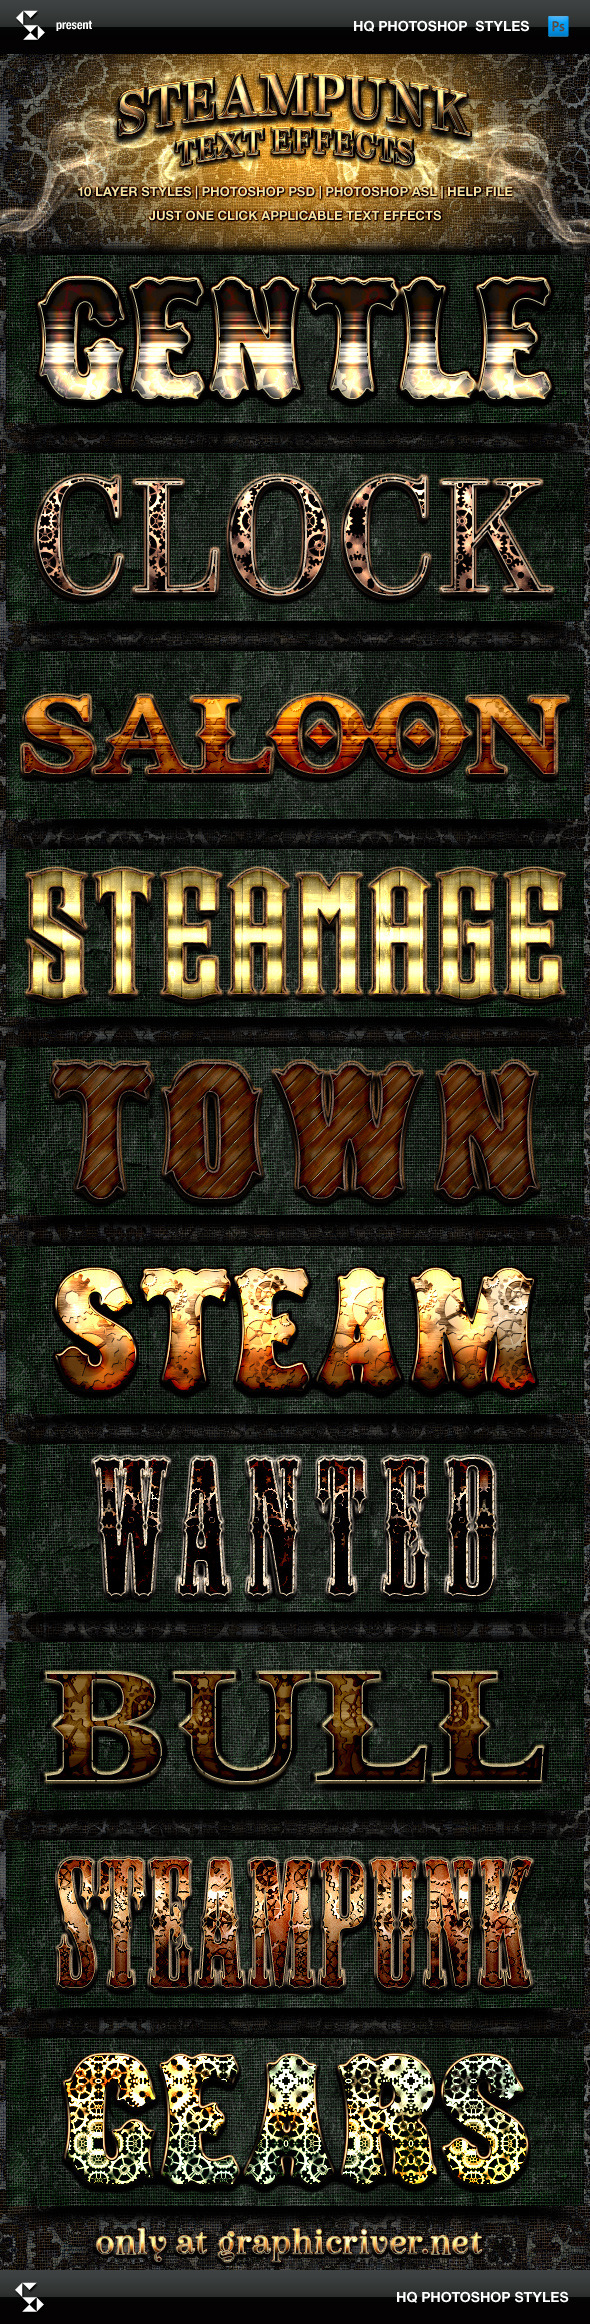 Steampunk Text Effects